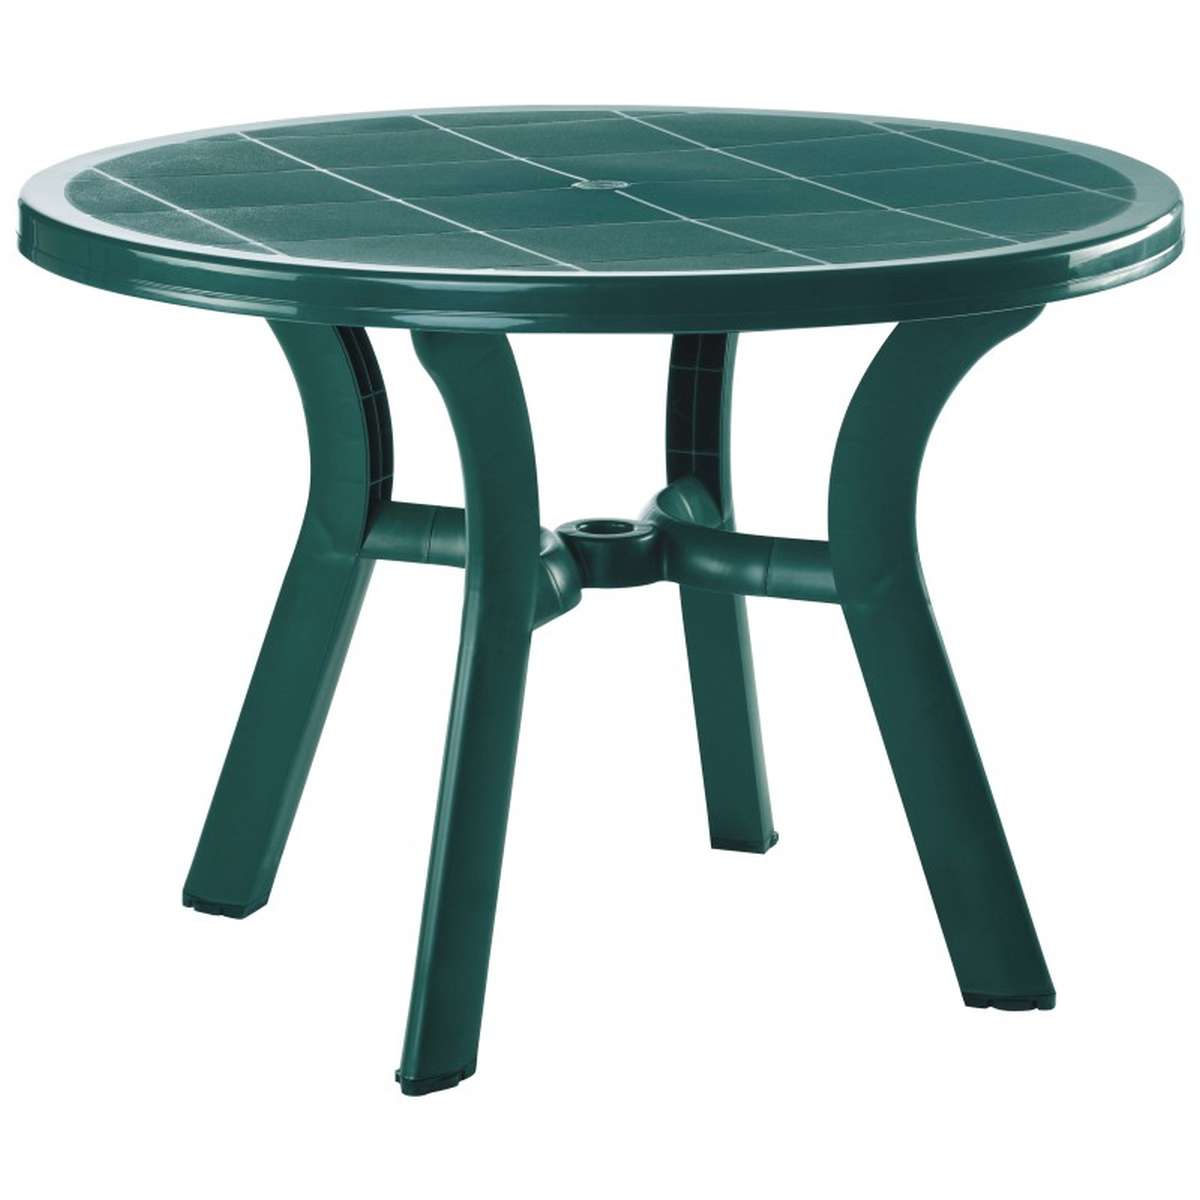 Compamia Truva Resin Round Dining Table 42 Inches